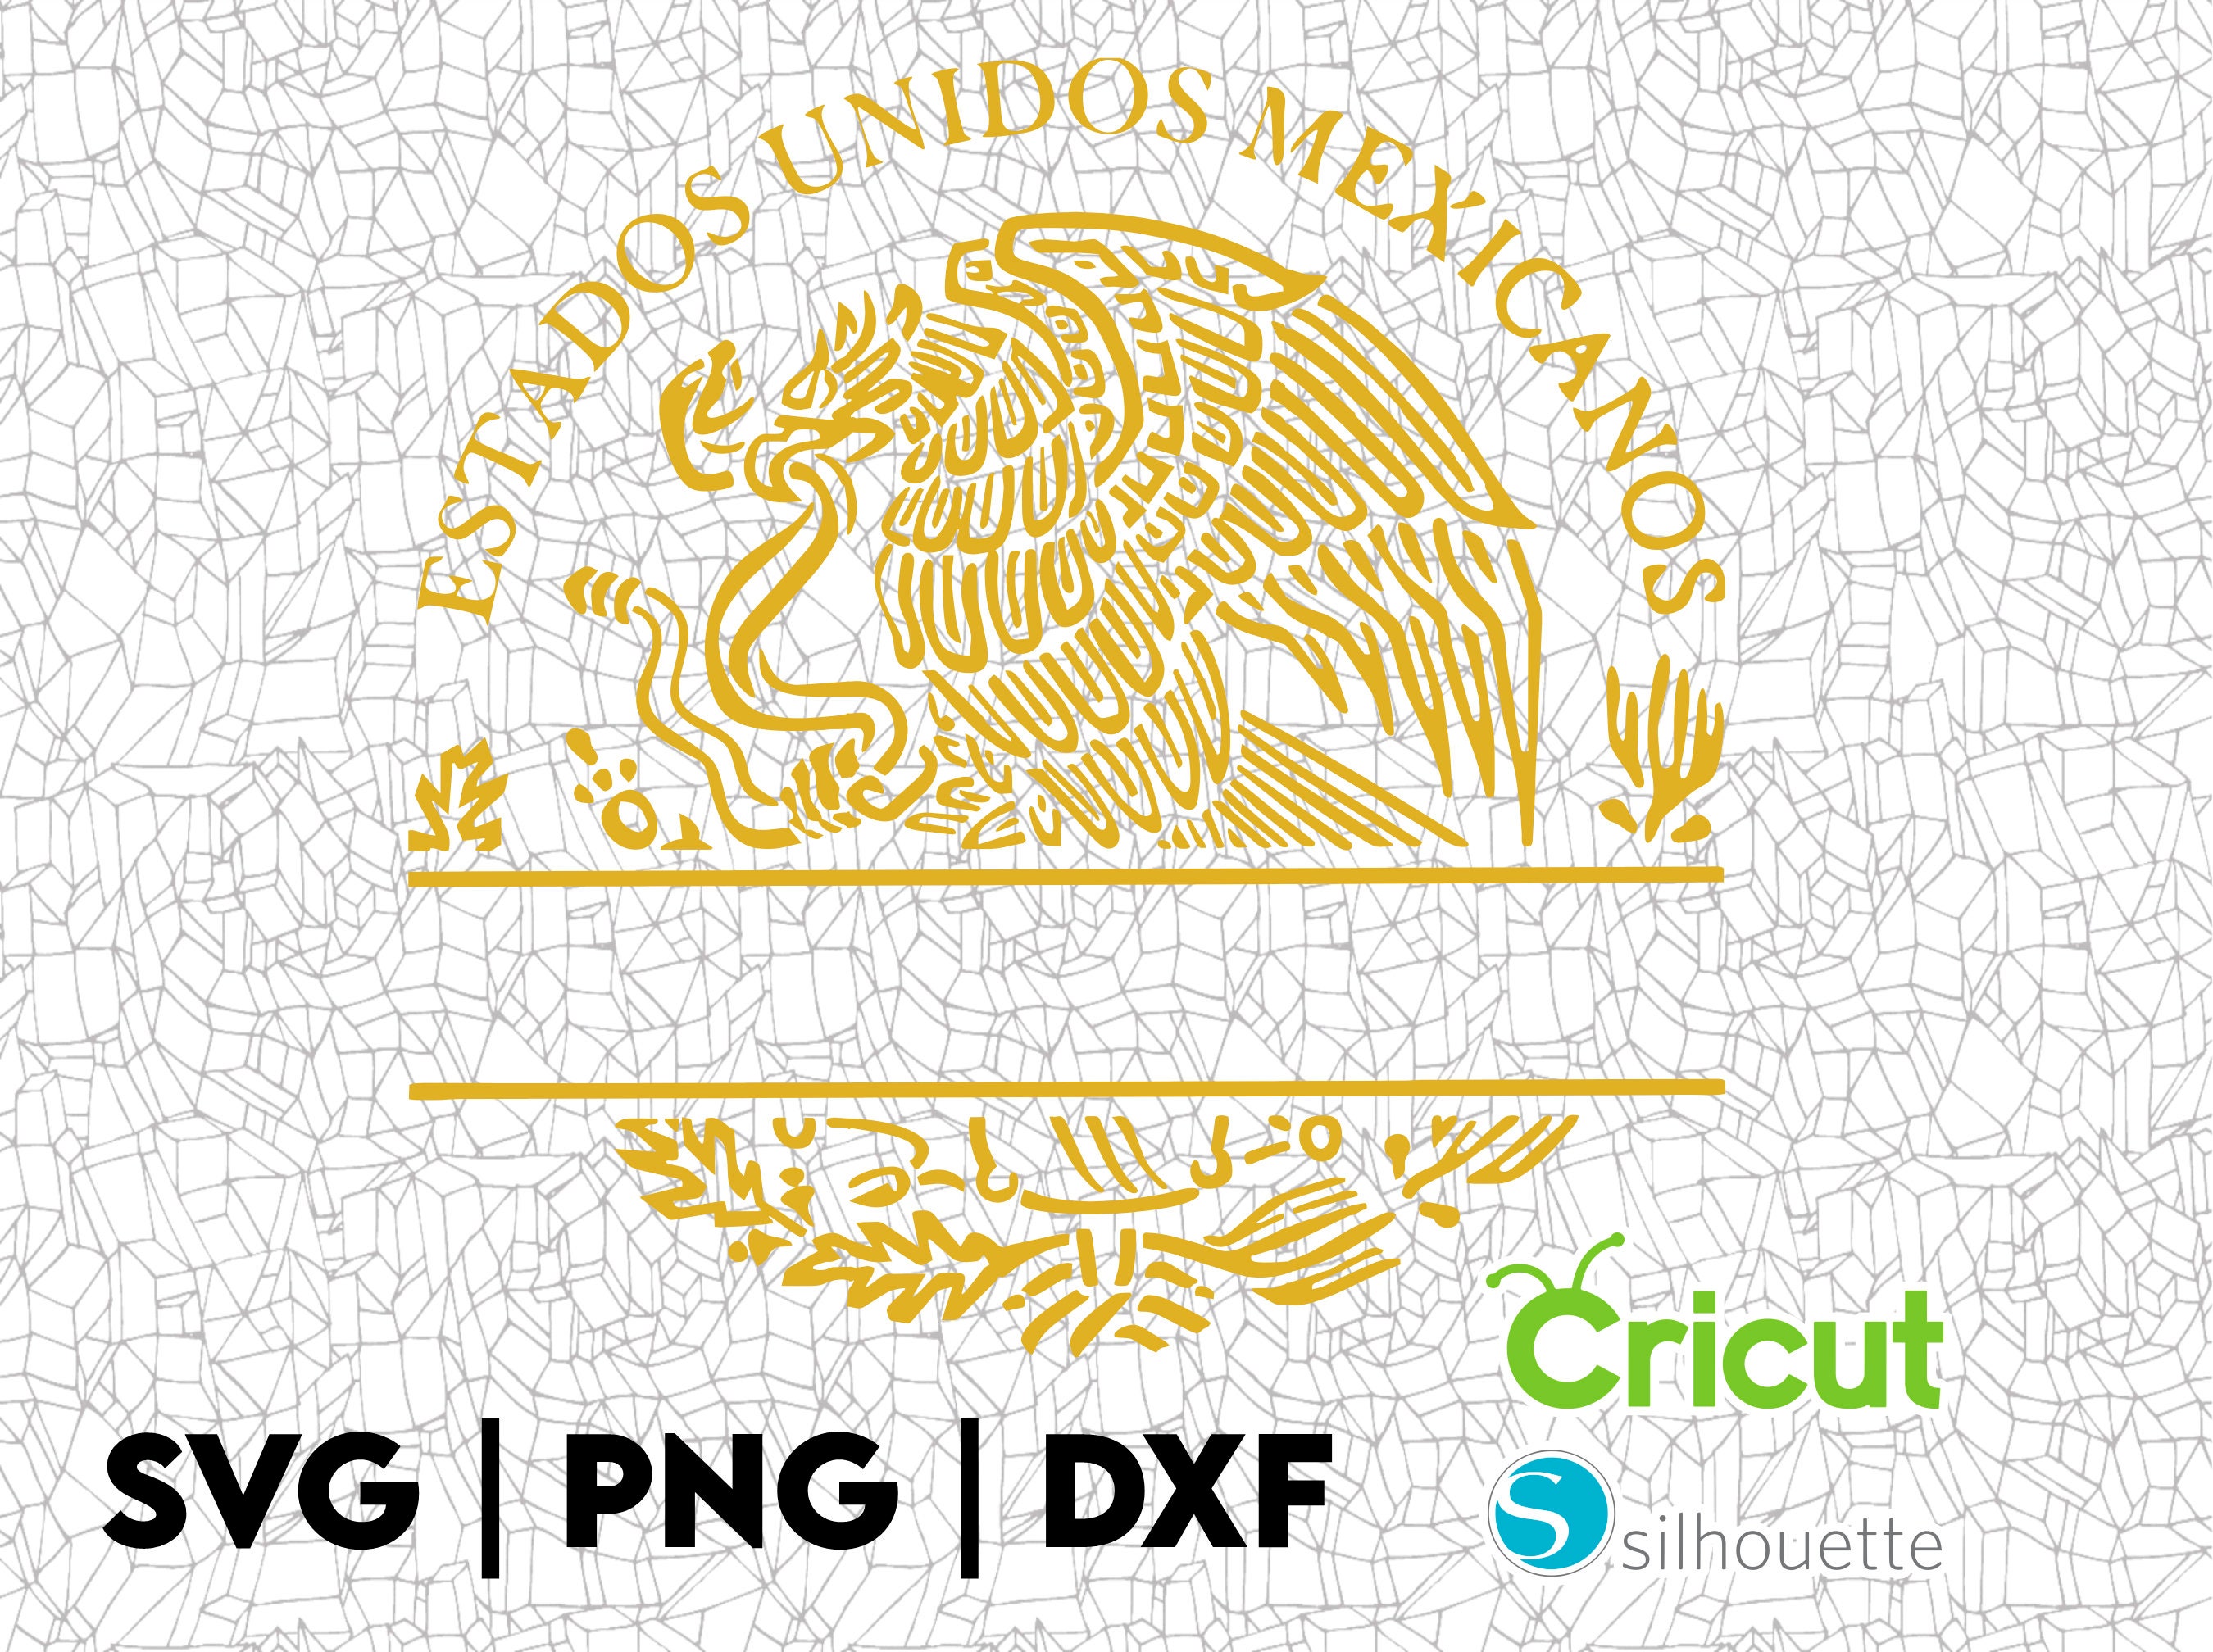 MEXICO Flag (Gold letters version)' Sticker